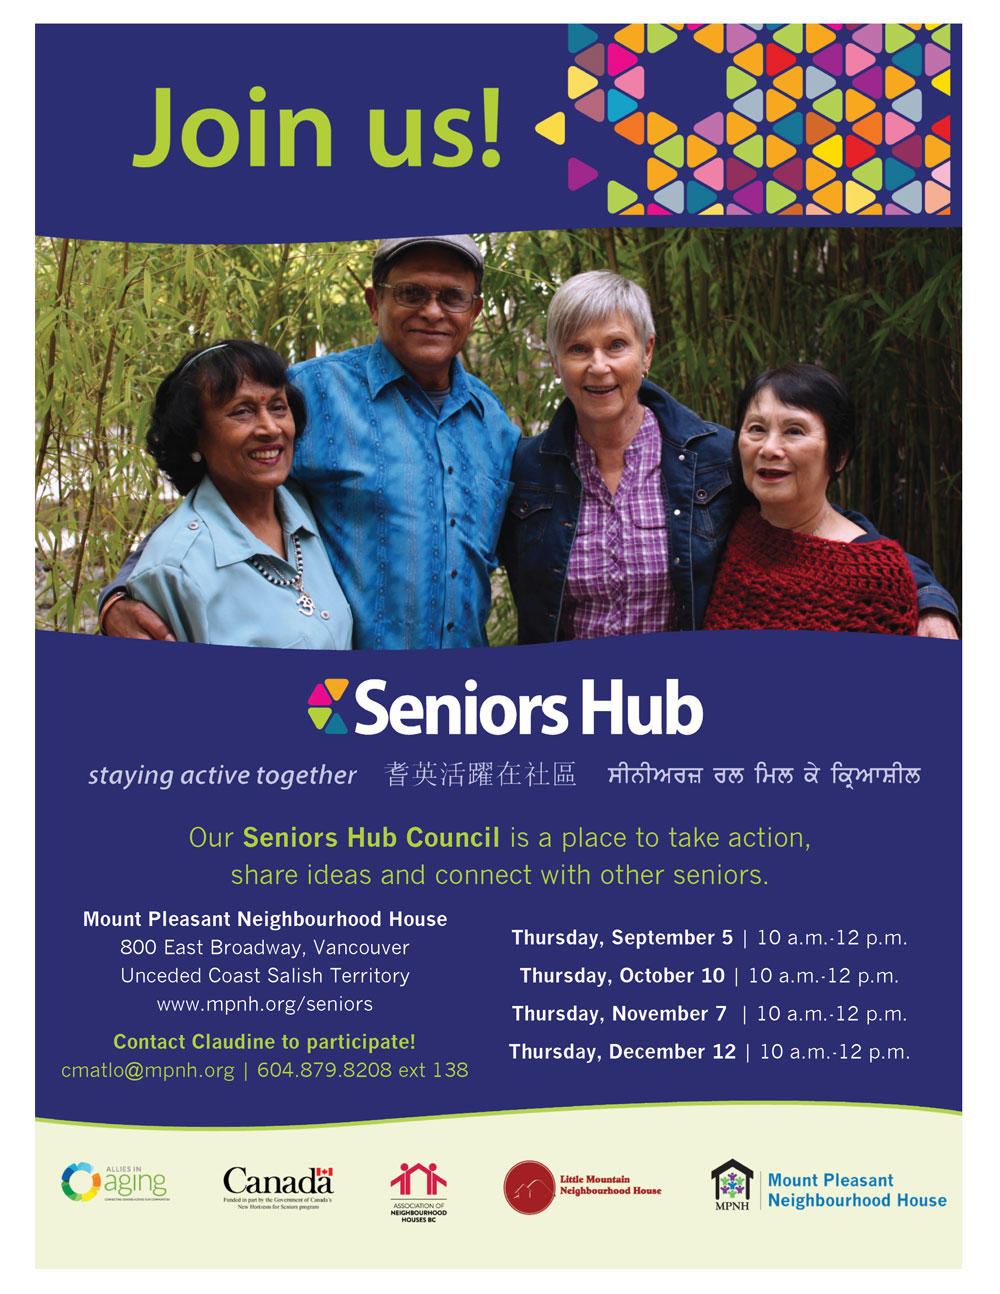 An image of the poster with meeting details, featuring a photo of four seniors from different cultural backgrounds, socializing outdoors.